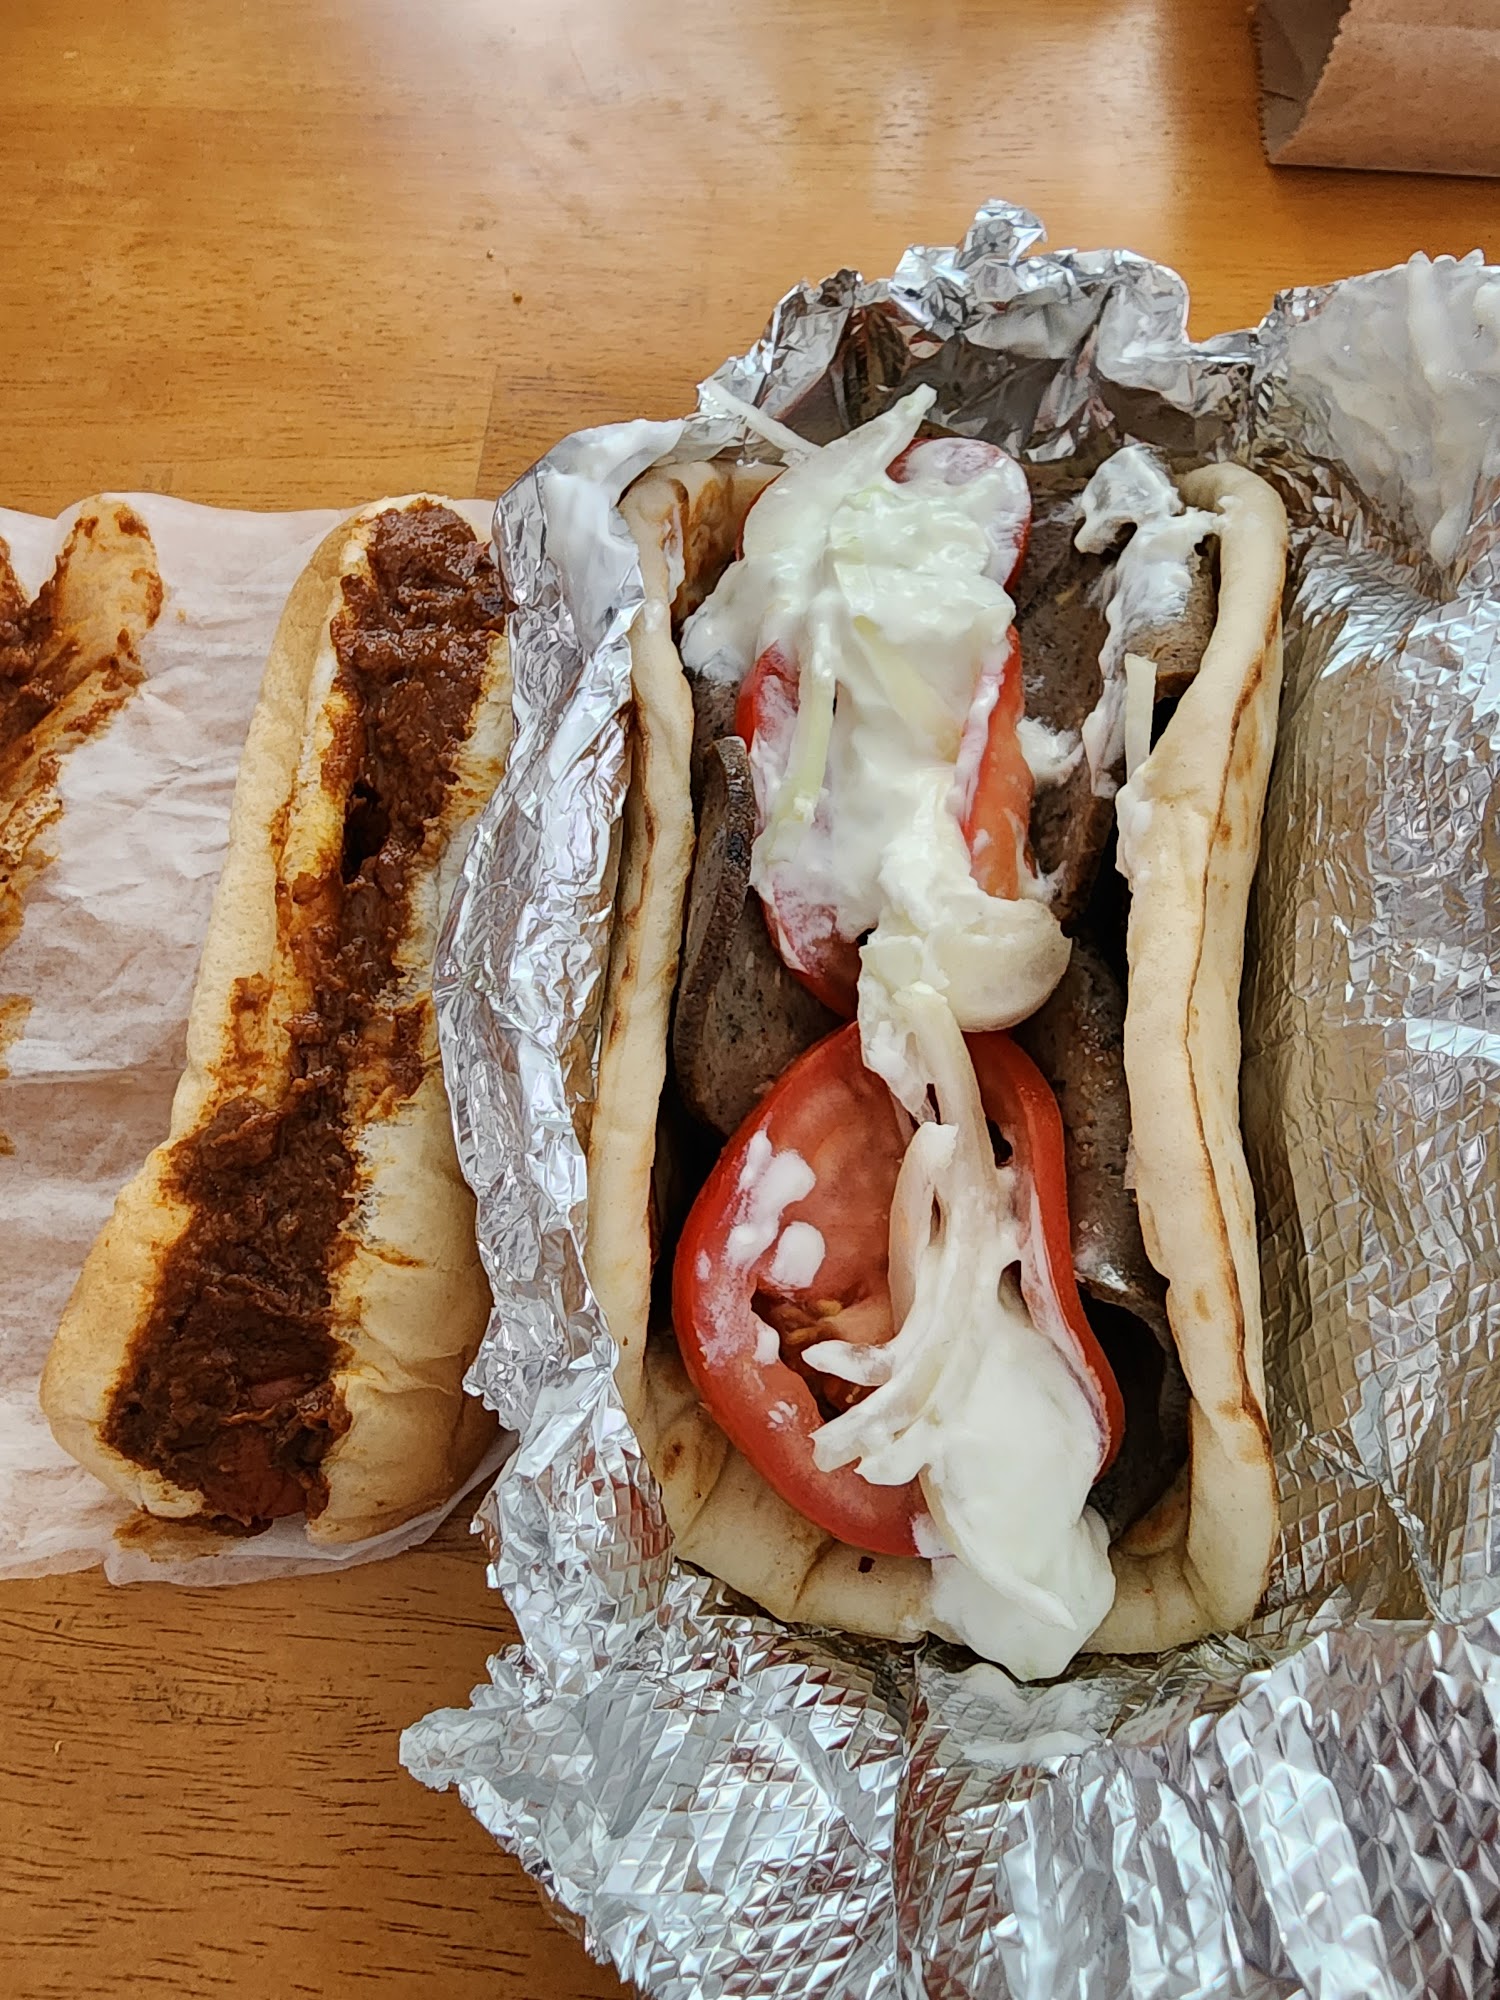 Hounds Hot Dogs & Gyros